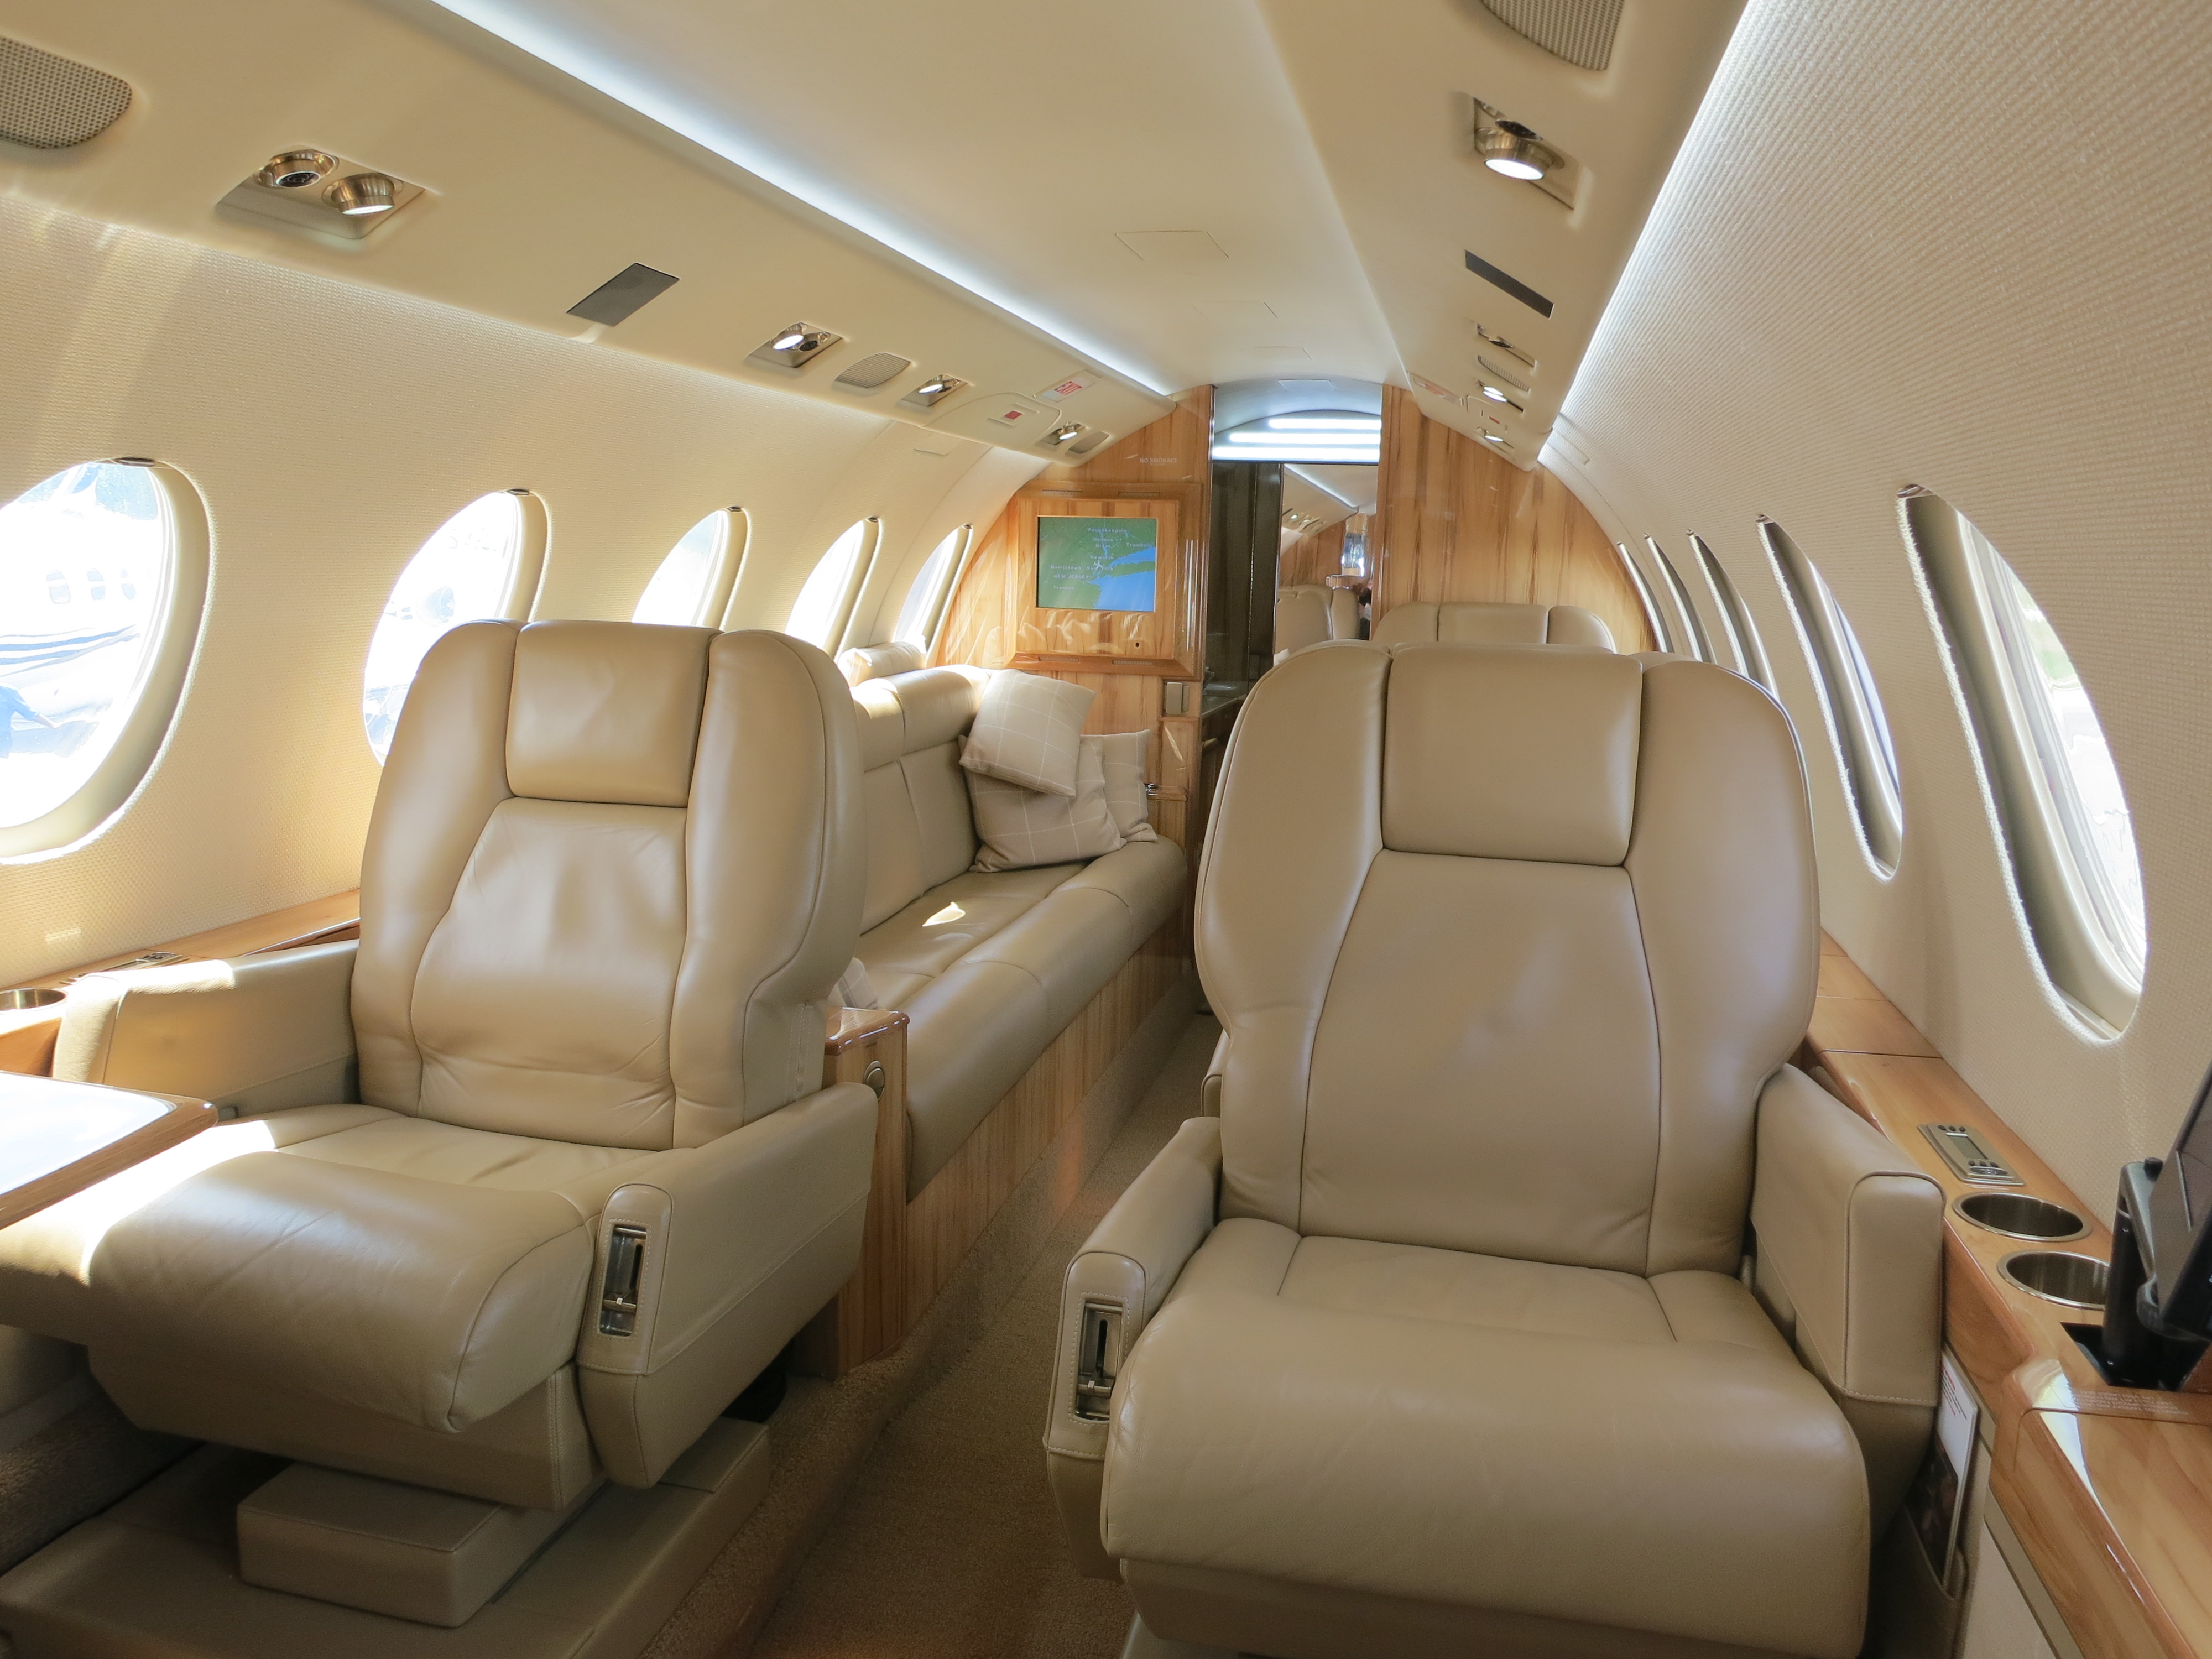 Unmatched Elegance in the Sky: Indulging in the Fine Materials Used for Private Jet Cabin Interiors